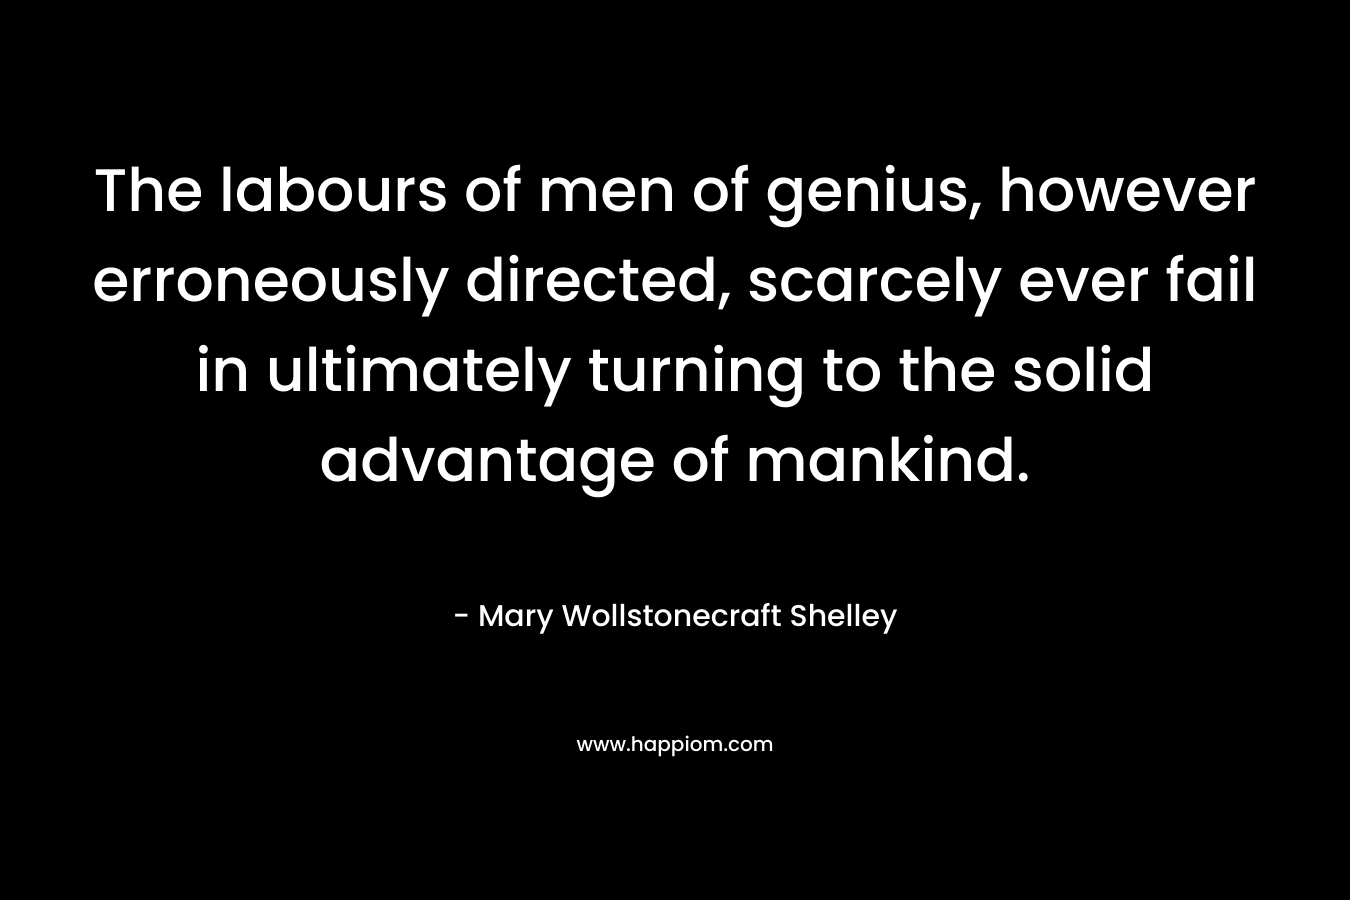 The labours of men of genius, however erroneously directed, scarcely ever fail in ultimately turning to the solid advantage of mankind. – Mary Wollstonecraft Shelley